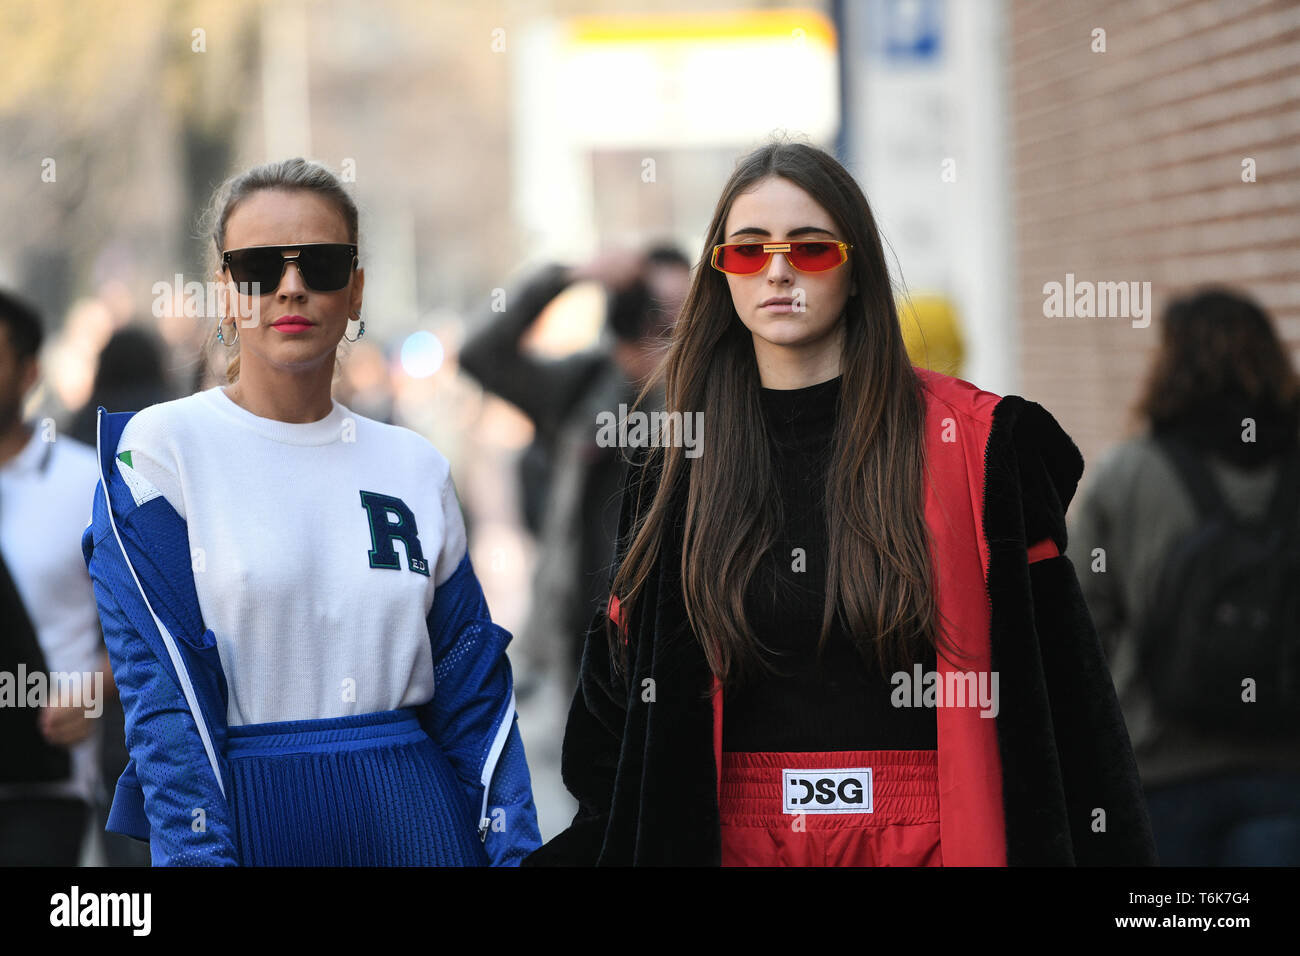 Milan, Italy - February 21, 2019: Street style – Look after a fashion show during Milan Fashion Week - MFWFW19 Stock Photo